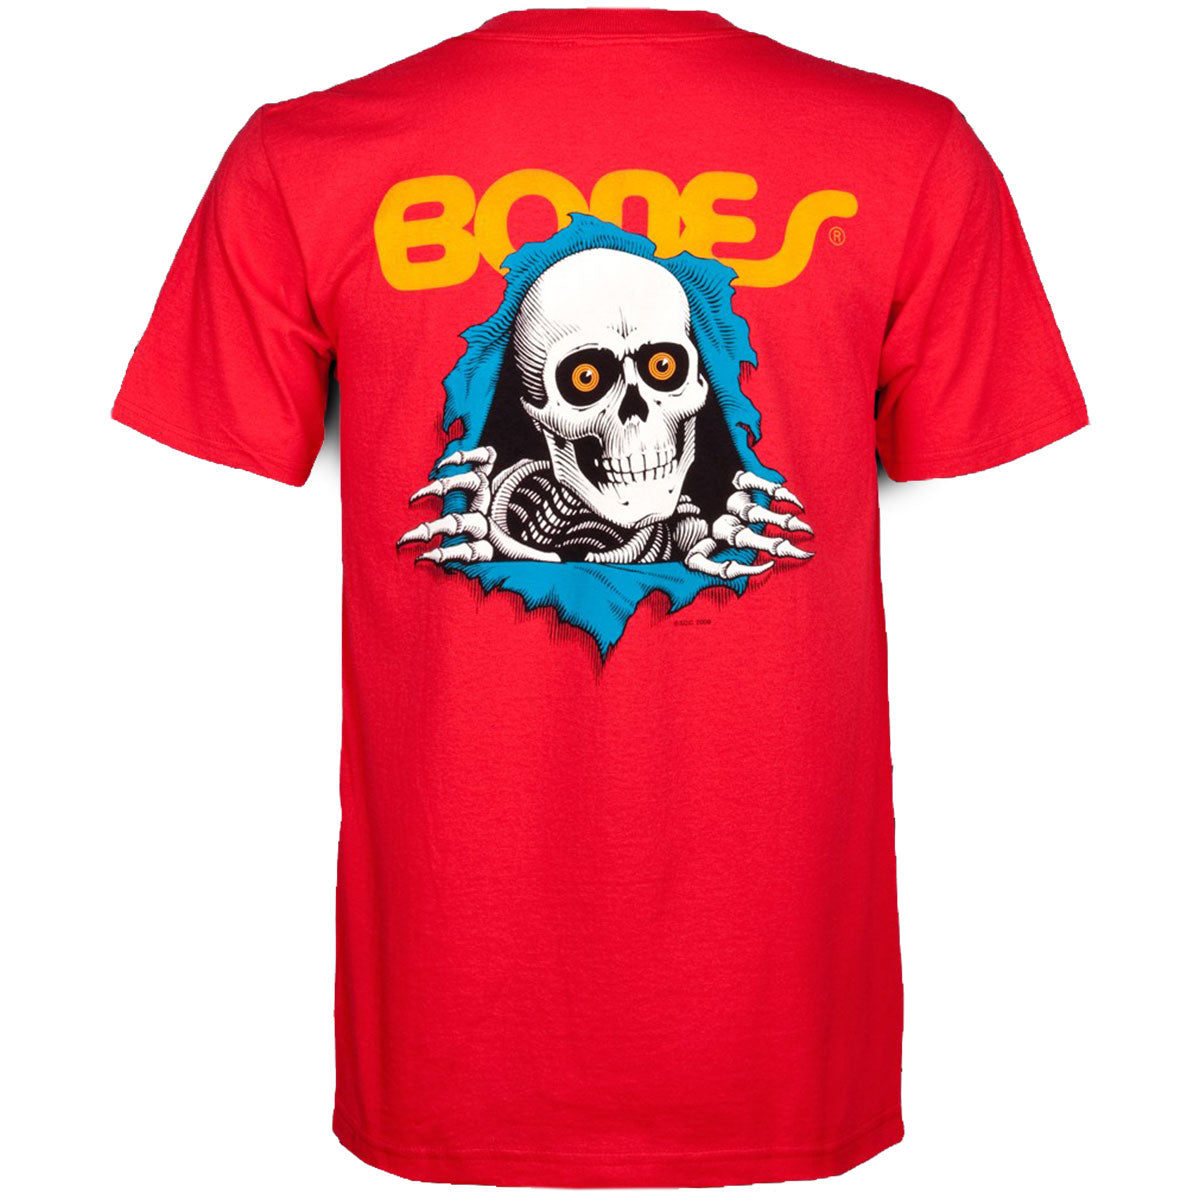 Powell-Peralta Ripper T-Shirt-Red-XL image 1